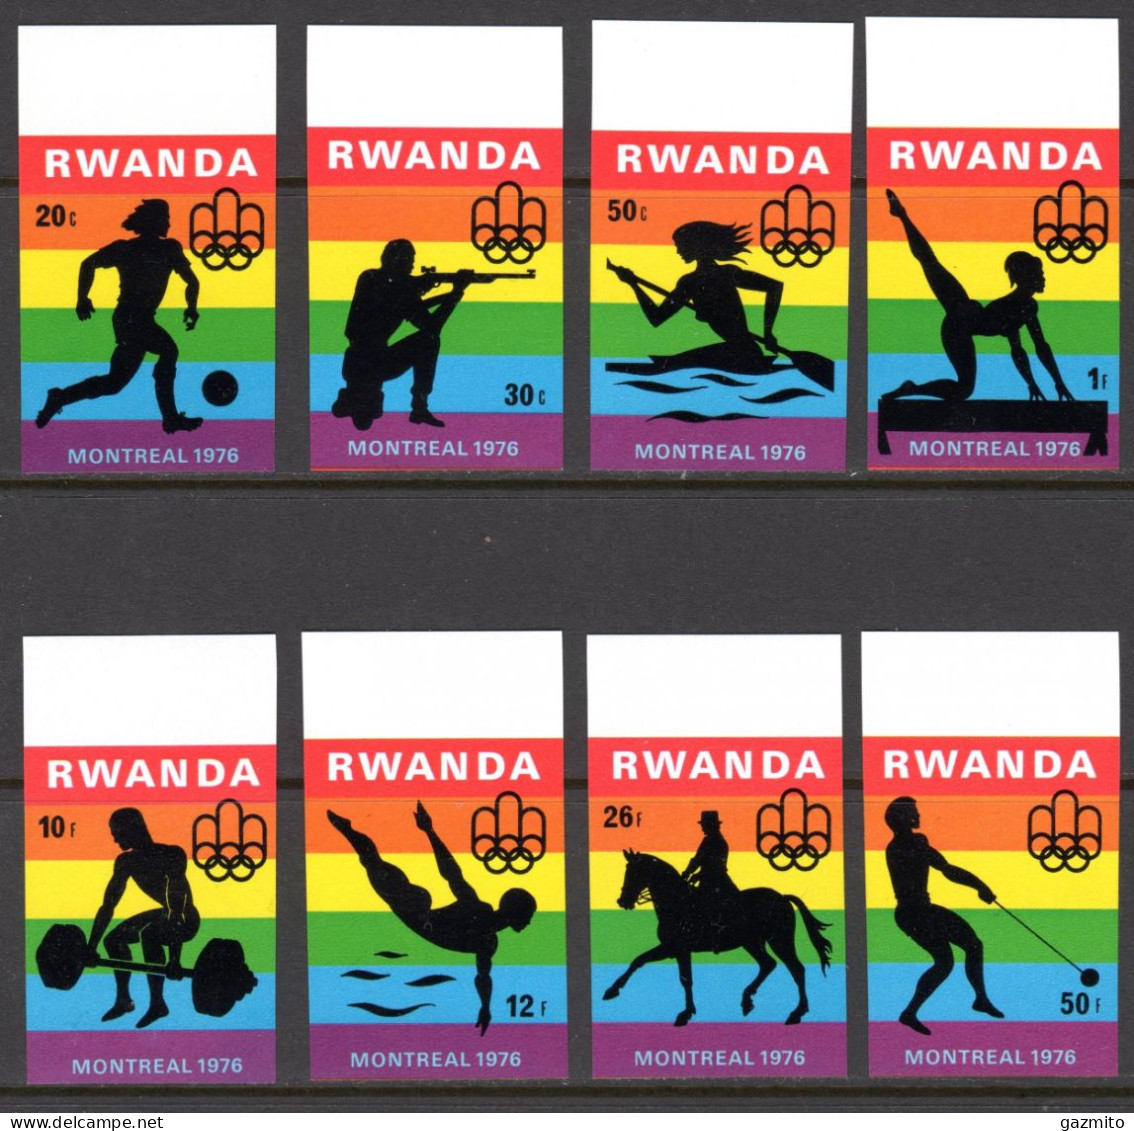 Rwanda1976, Olympic Games In Montreal, Football, Shooting, Rowing, Gymnastic, Horse Race, 8val IMPERFORATED - Ete 1976: Montréal